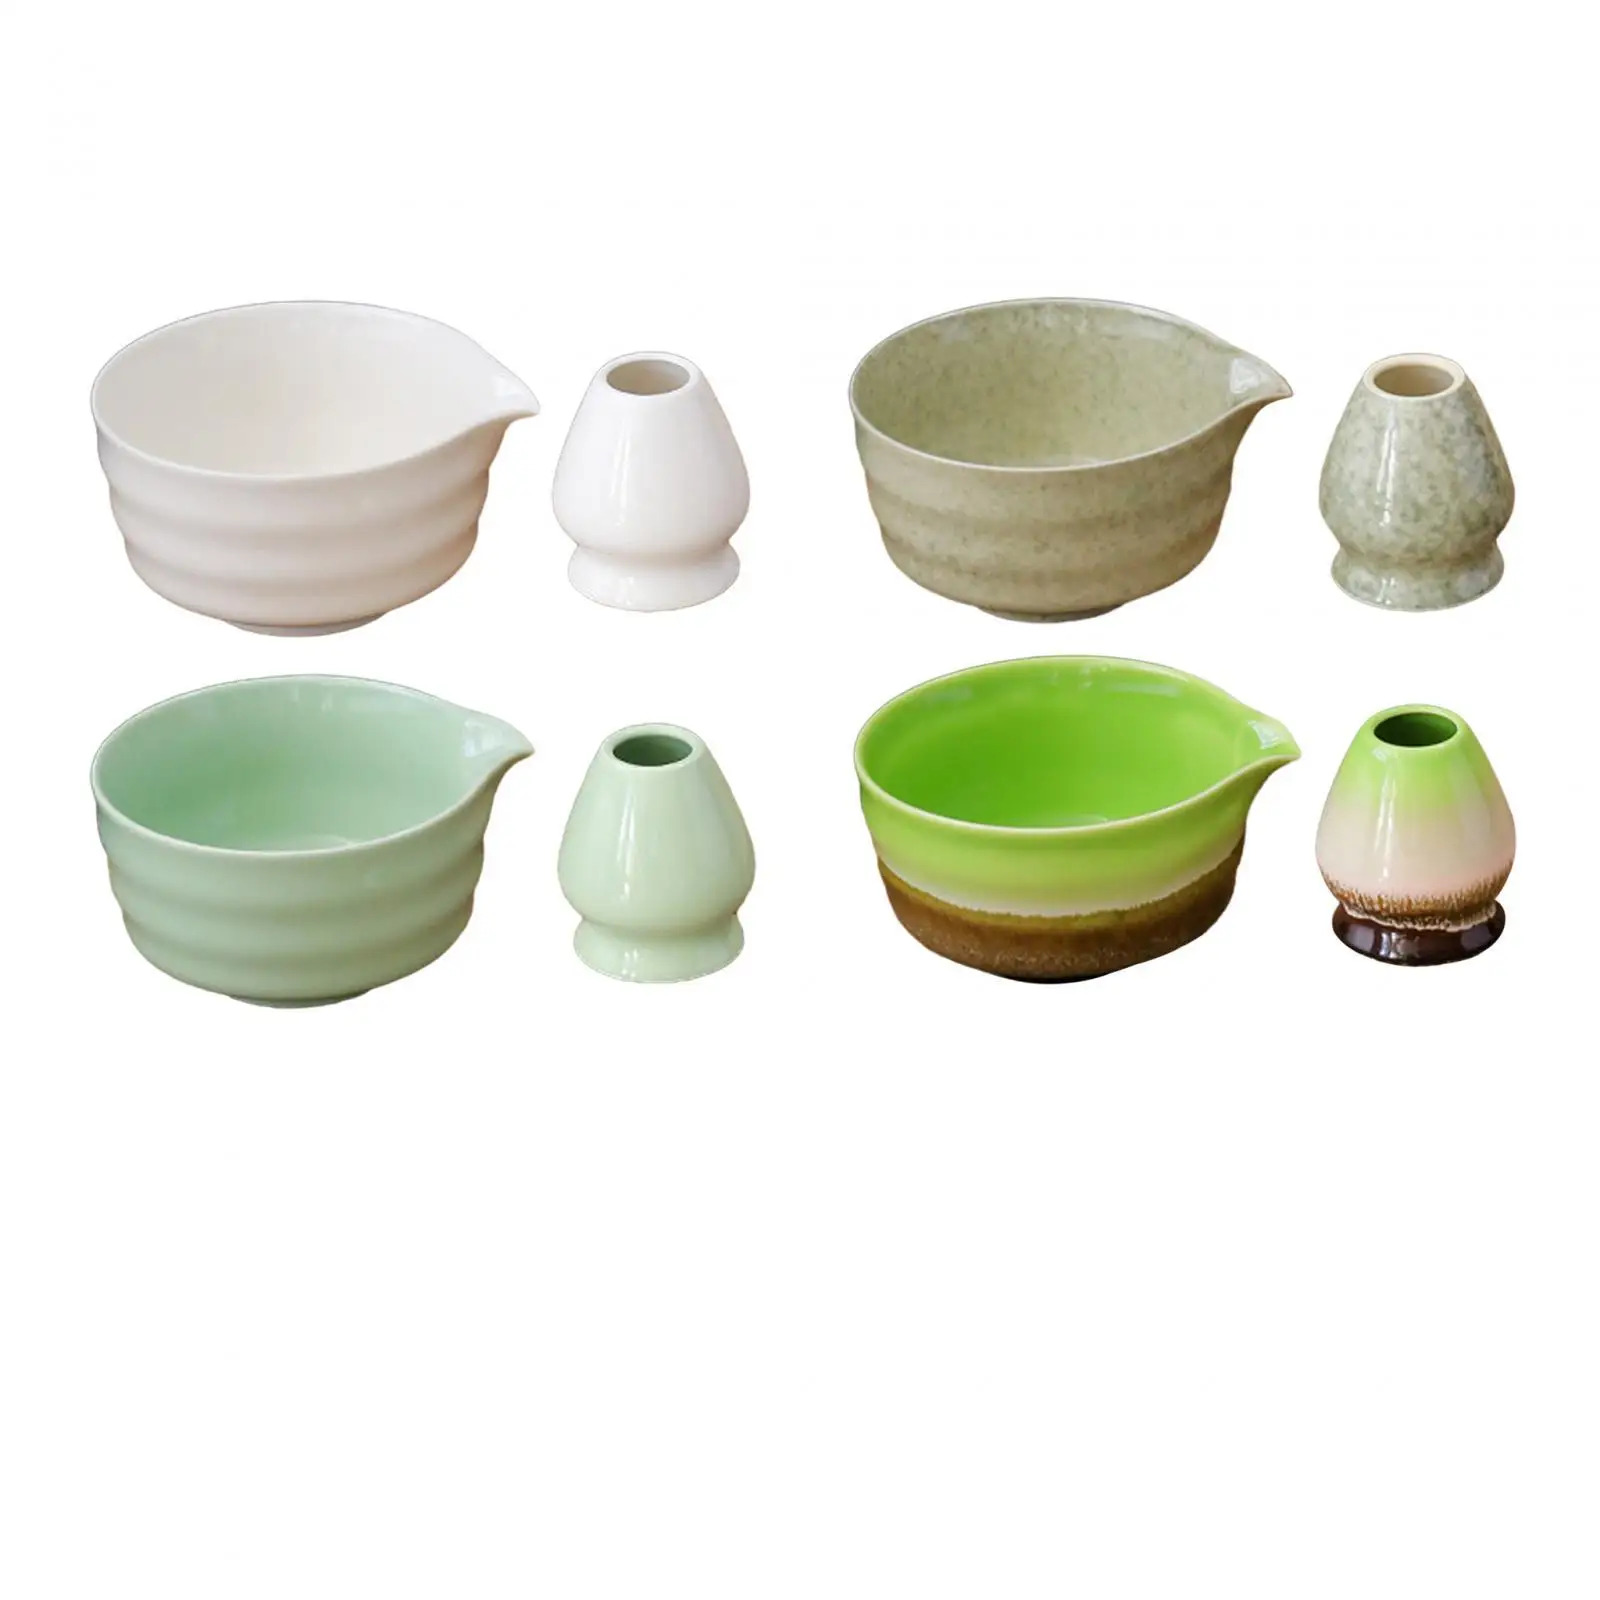 2Pcs Ceramic Matcha Bowl with Whisk Holder Portable Traditional Japanese Matcha Bowl for Tea Lovers Friends Beverage